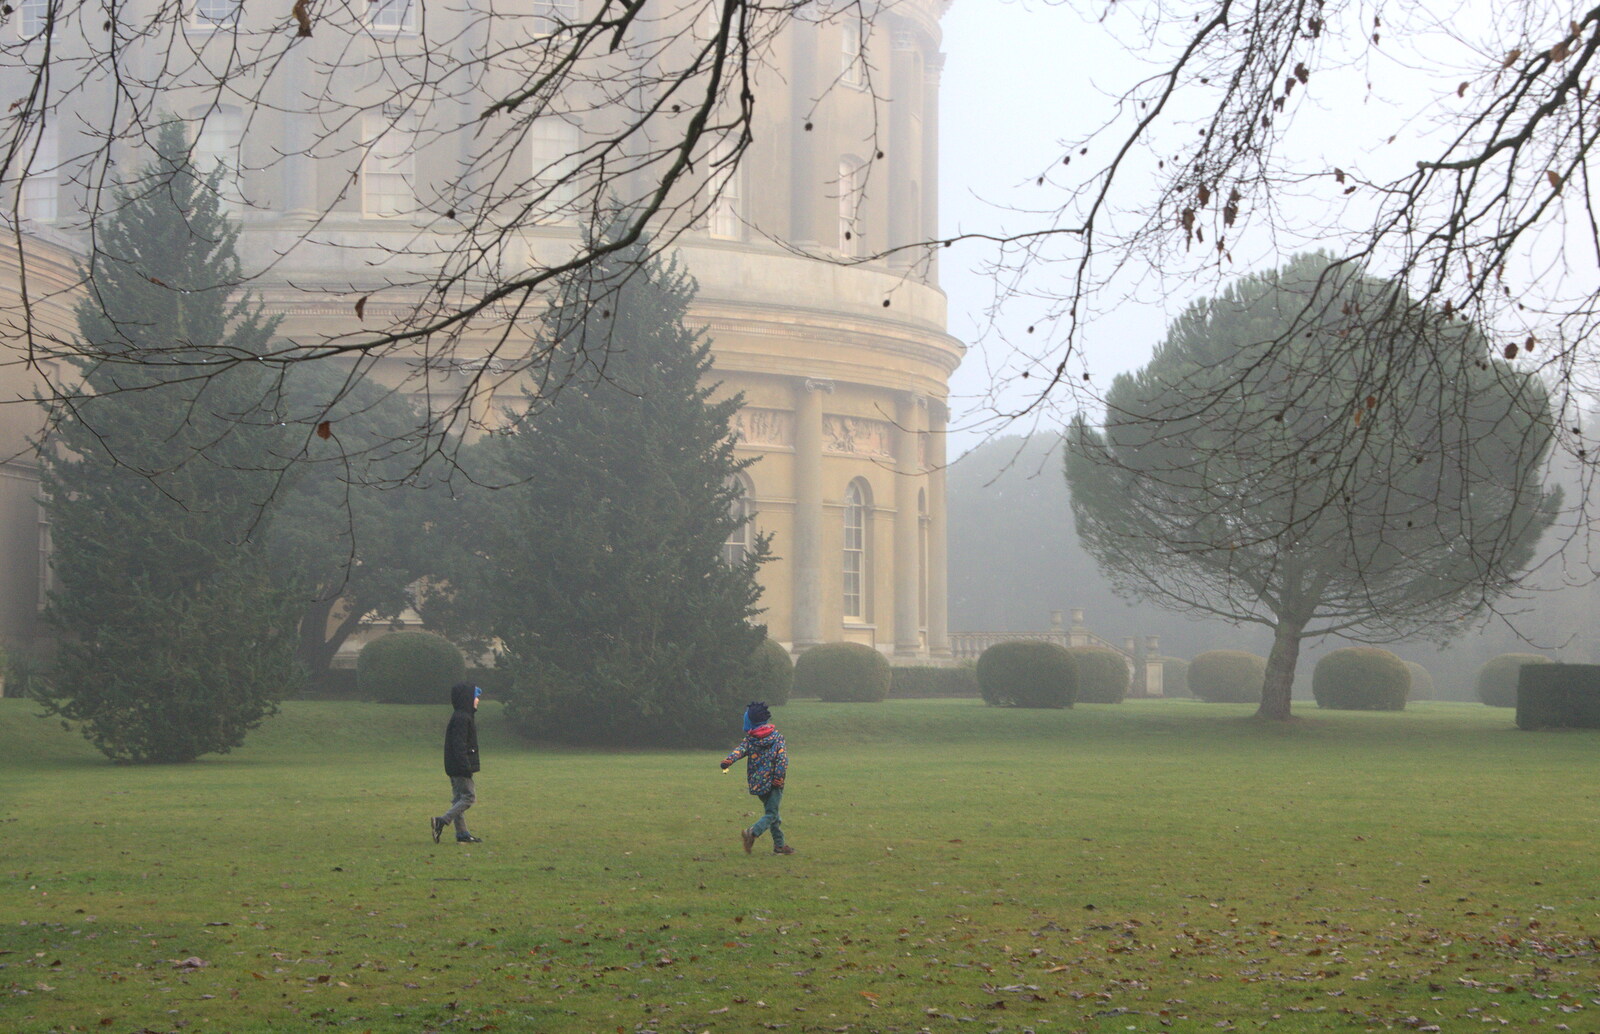 The boys run around in the mist from A Trip to Ickworth House, Horringer, Suffolk - 30th December 2016